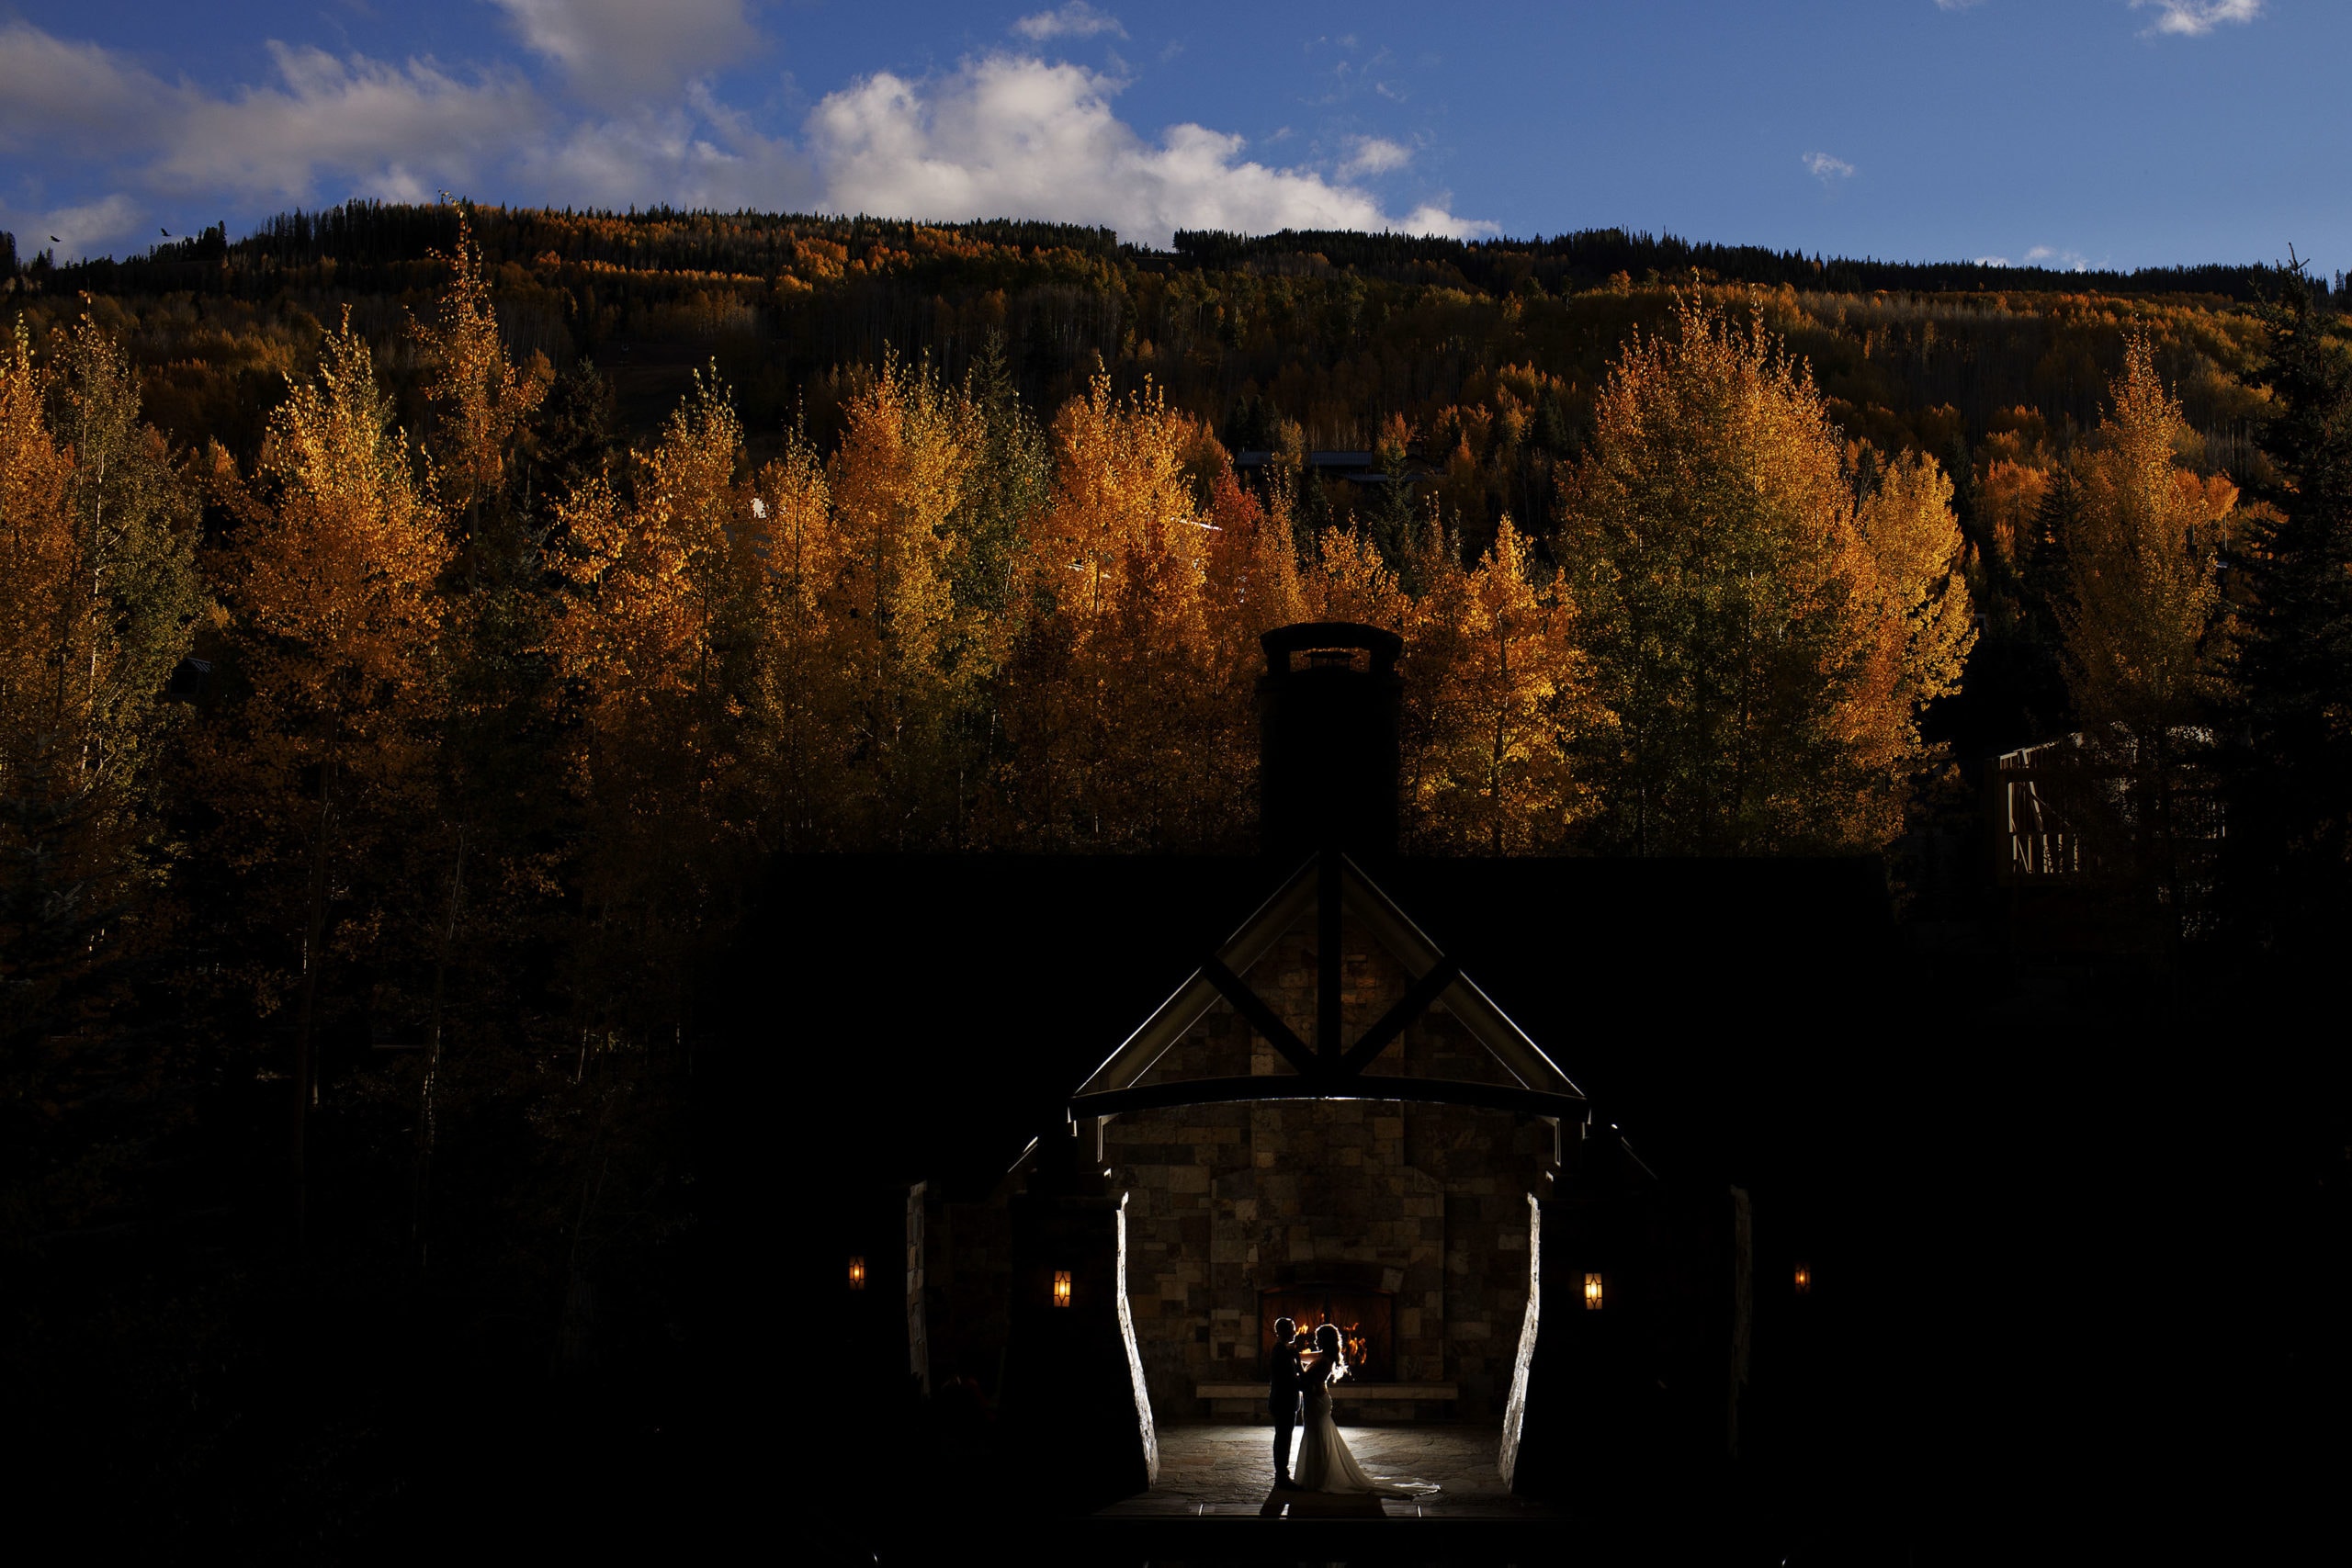 A bride and groom pose in front of the outdoor fireplace at Four Seasons Resort and Residences Vail as the sun illumnates the colorful aspen trees on the hillside